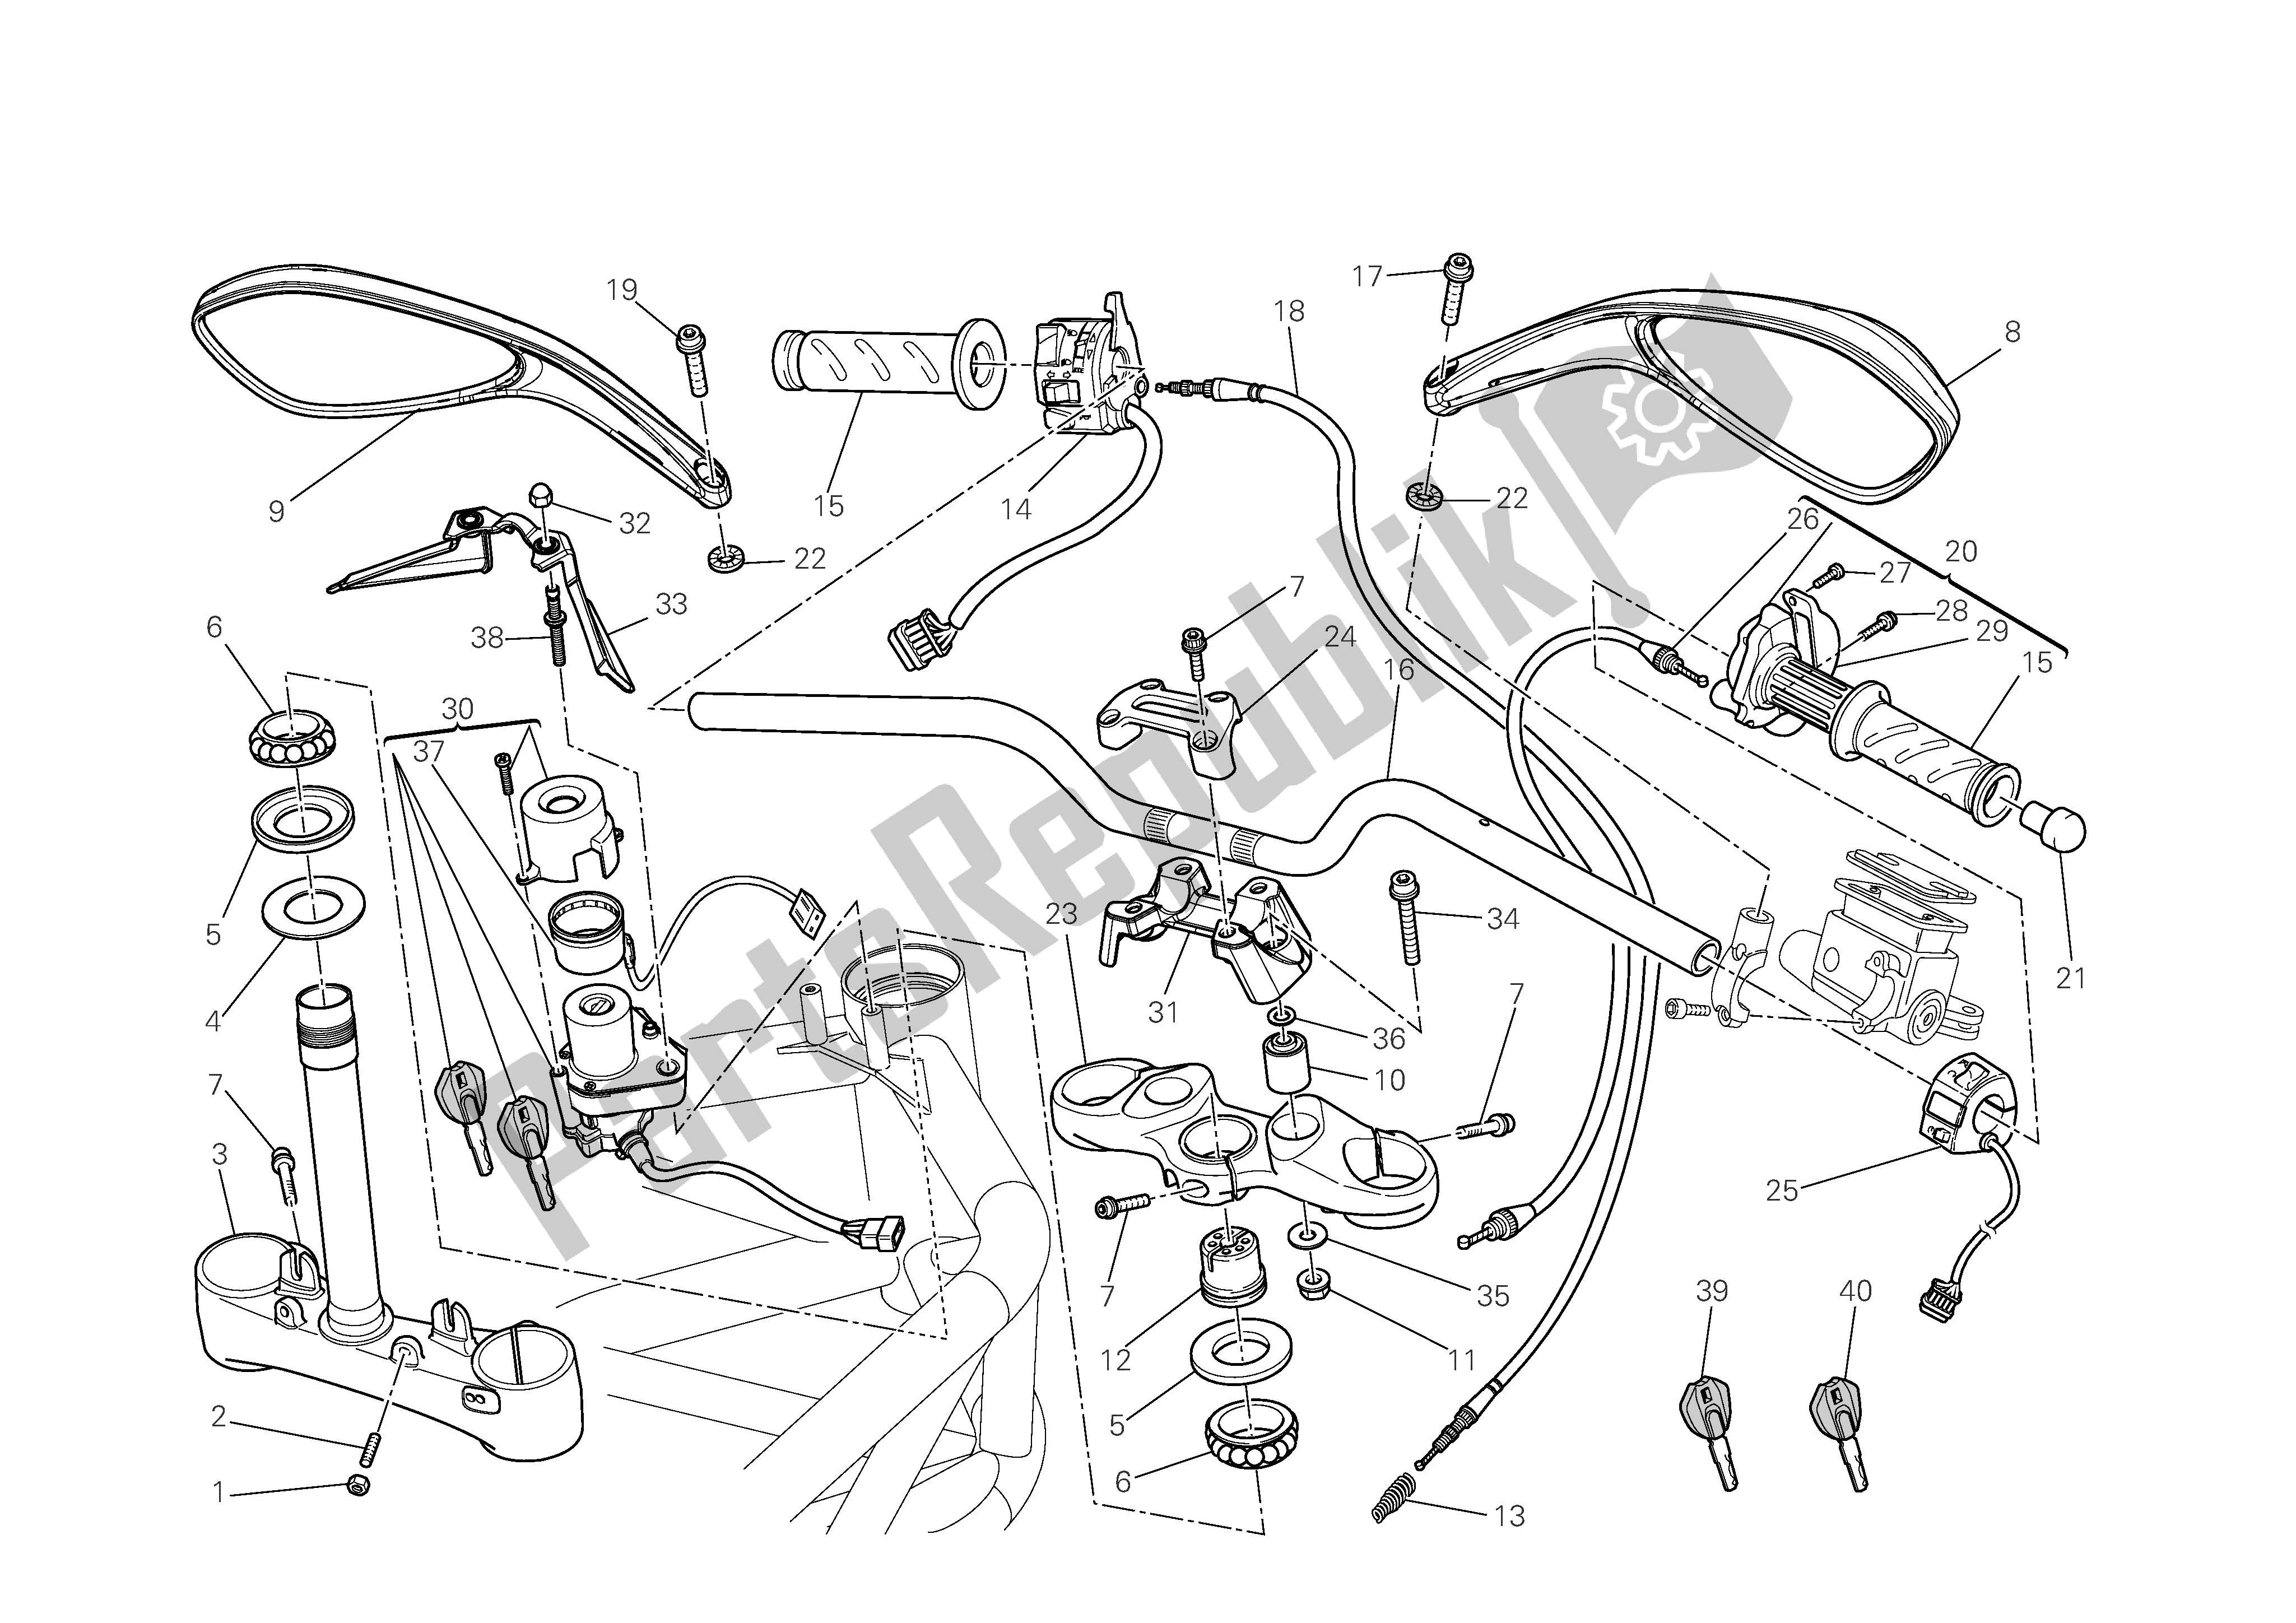 All parts for the Handlebar And Controls of the Ducati Monster 696 2009